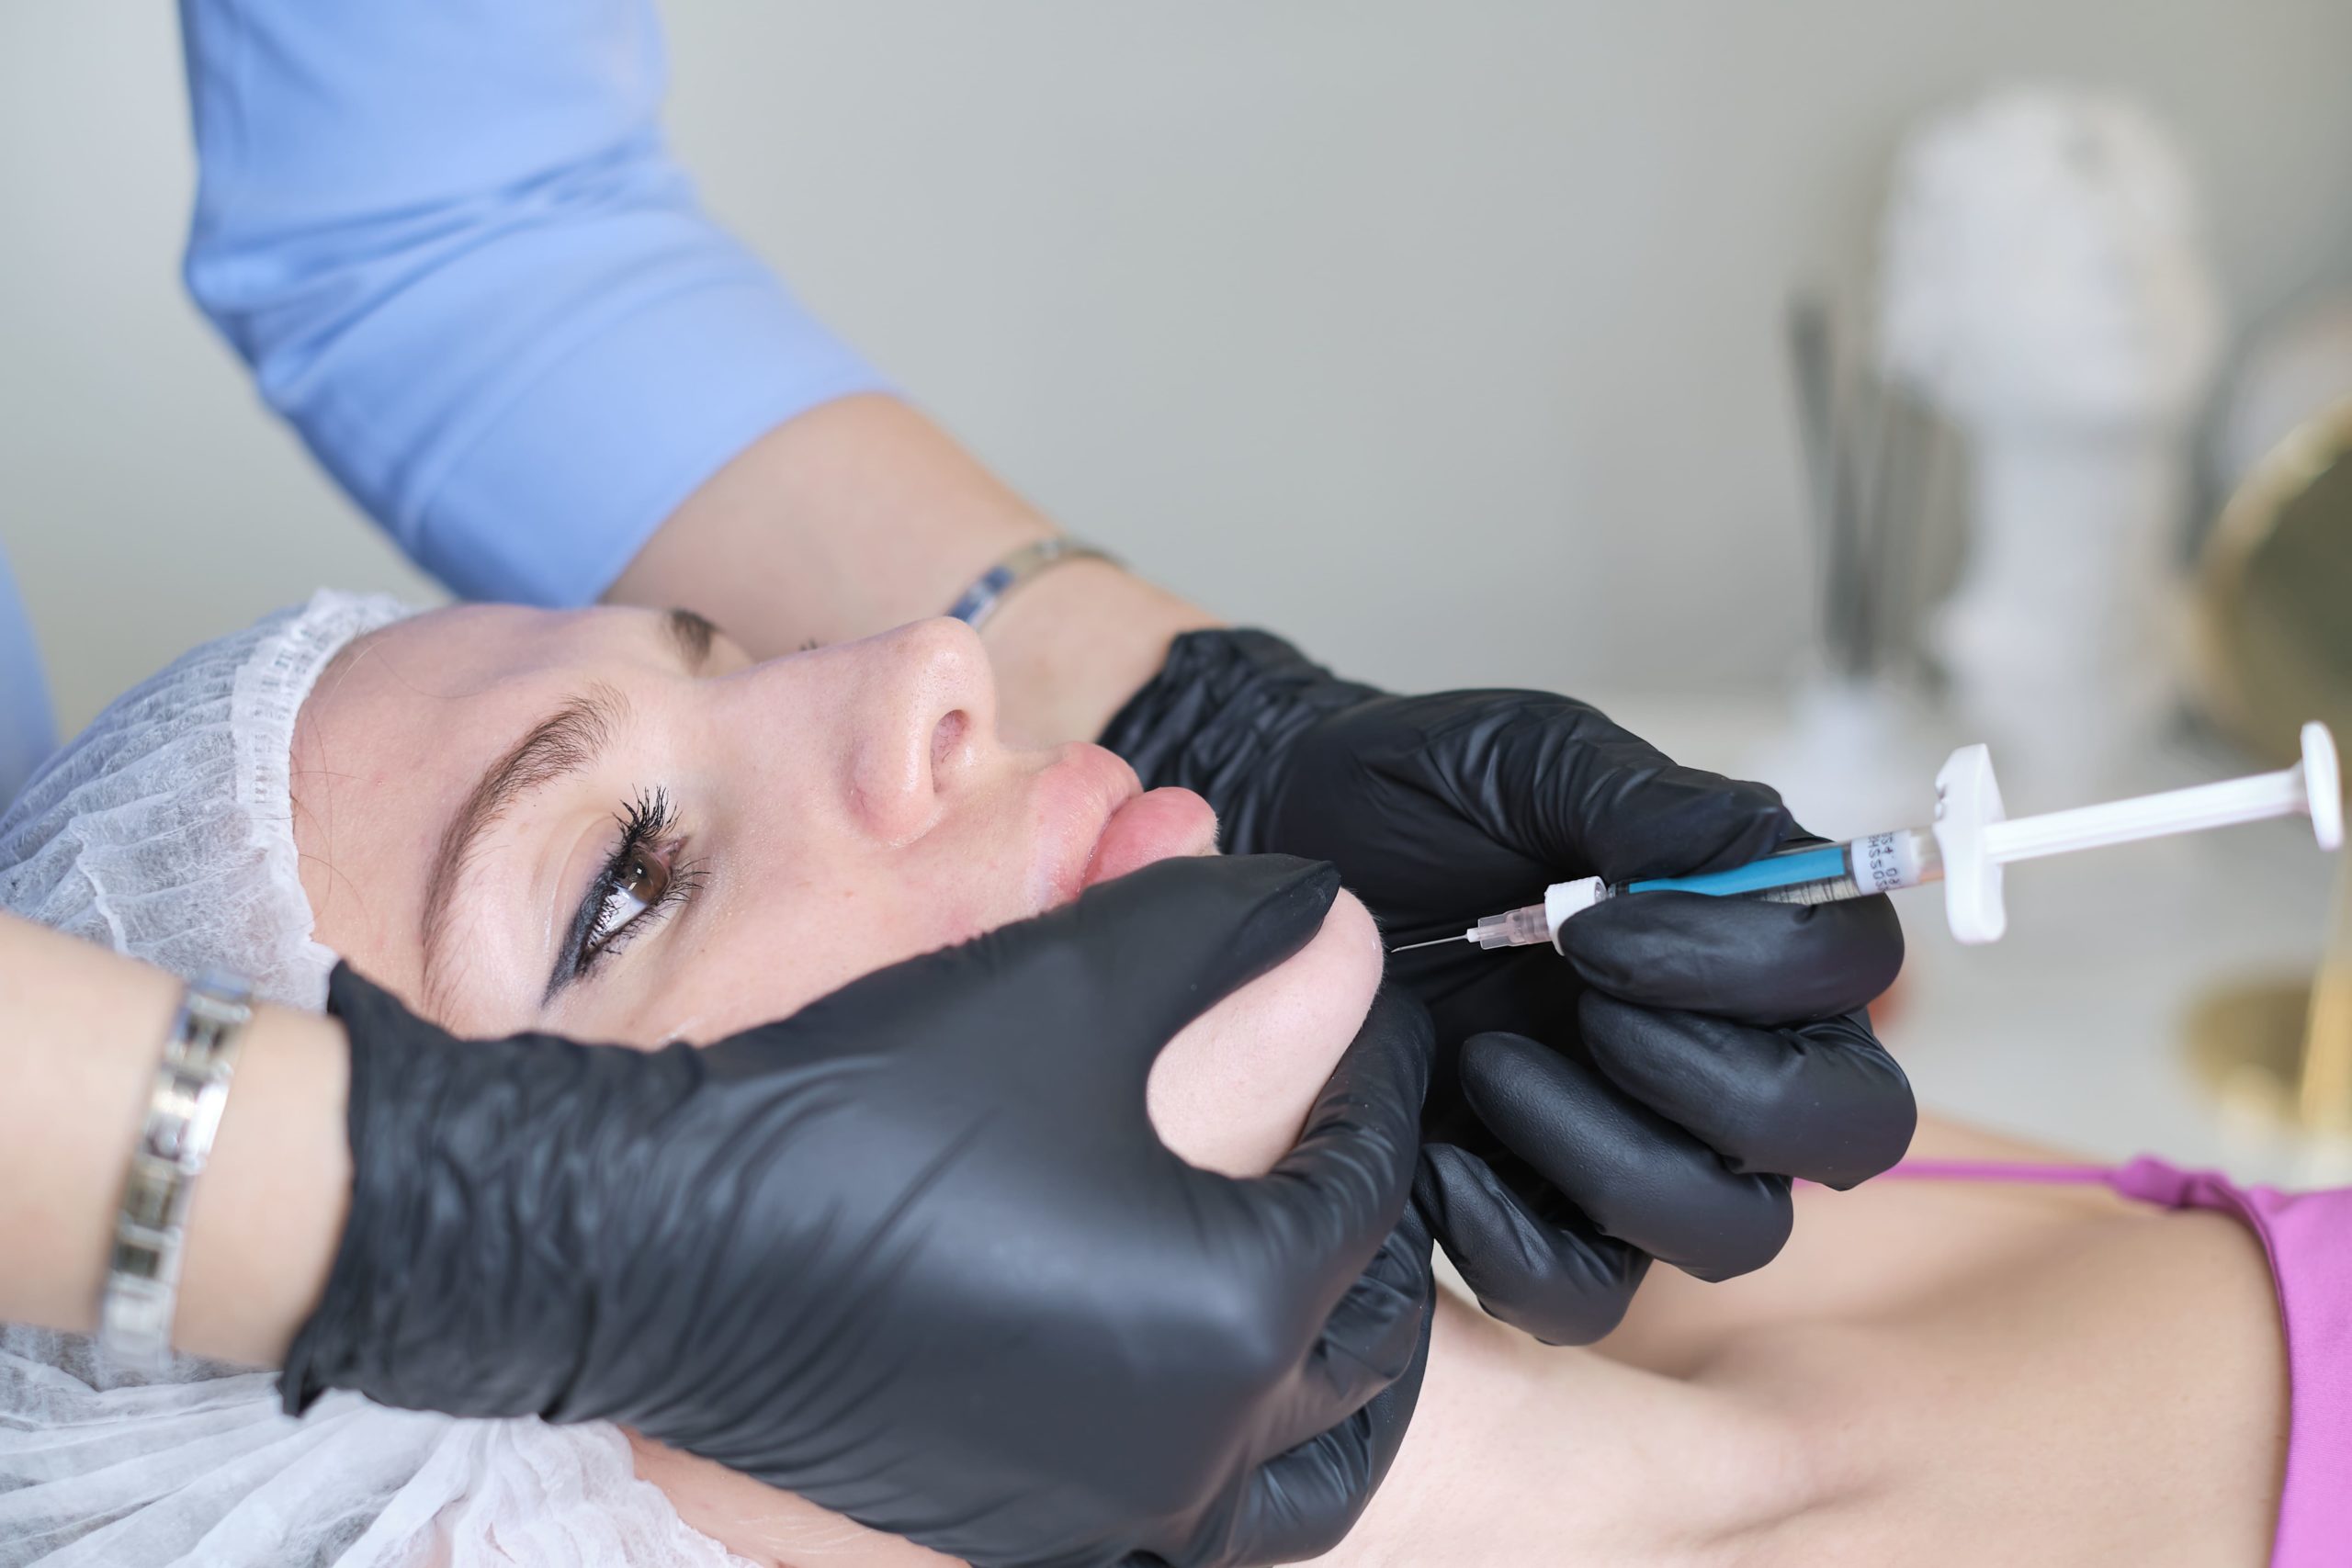 Kybella for Facial Sculpting Targeting Fat in Specific Areas